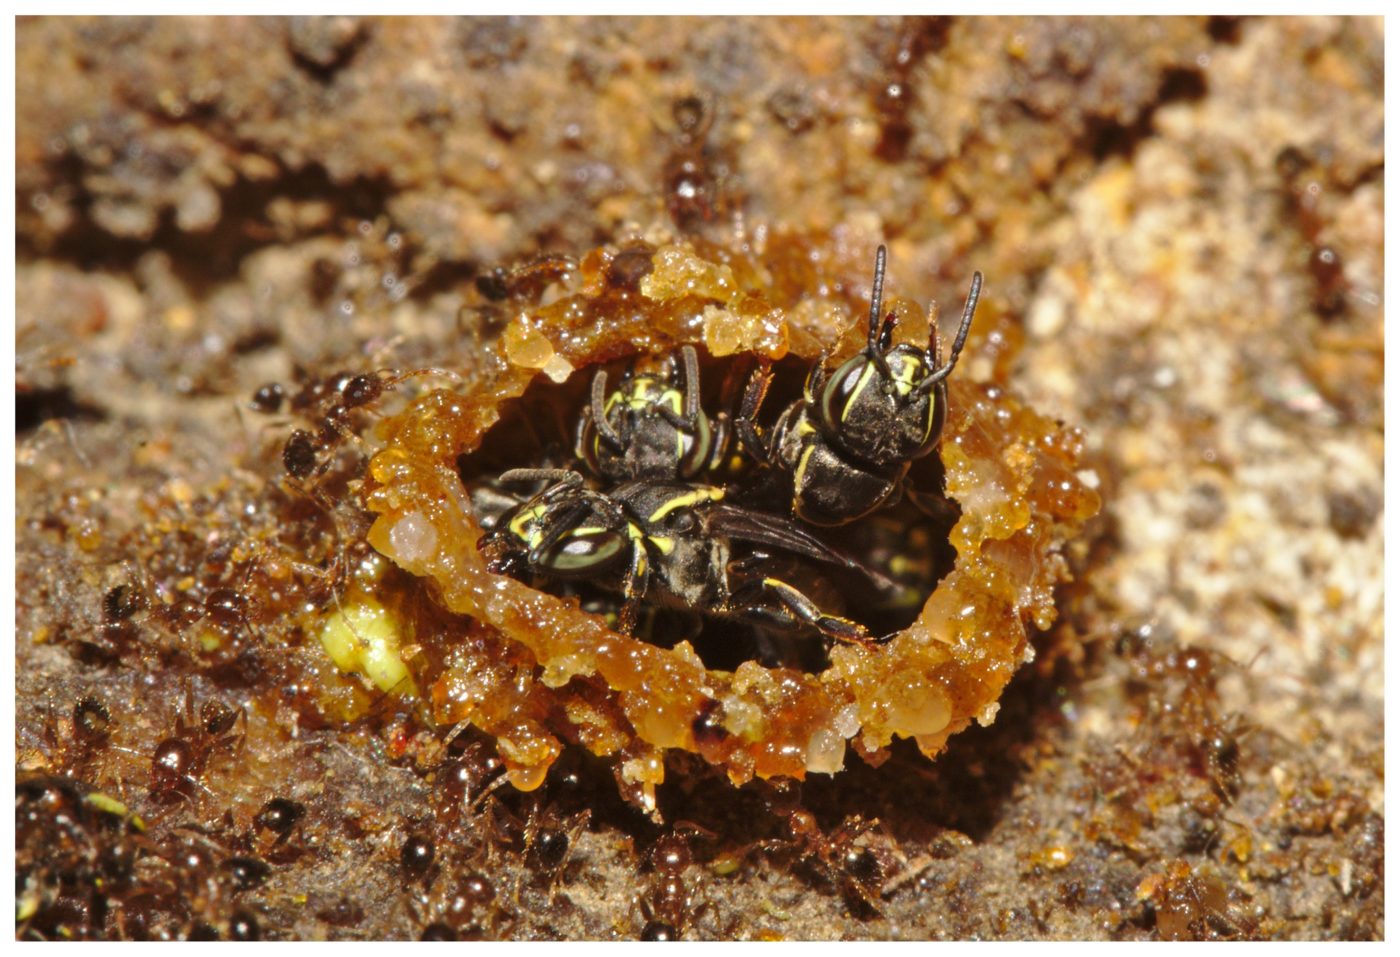 Three bees surrounded by ants